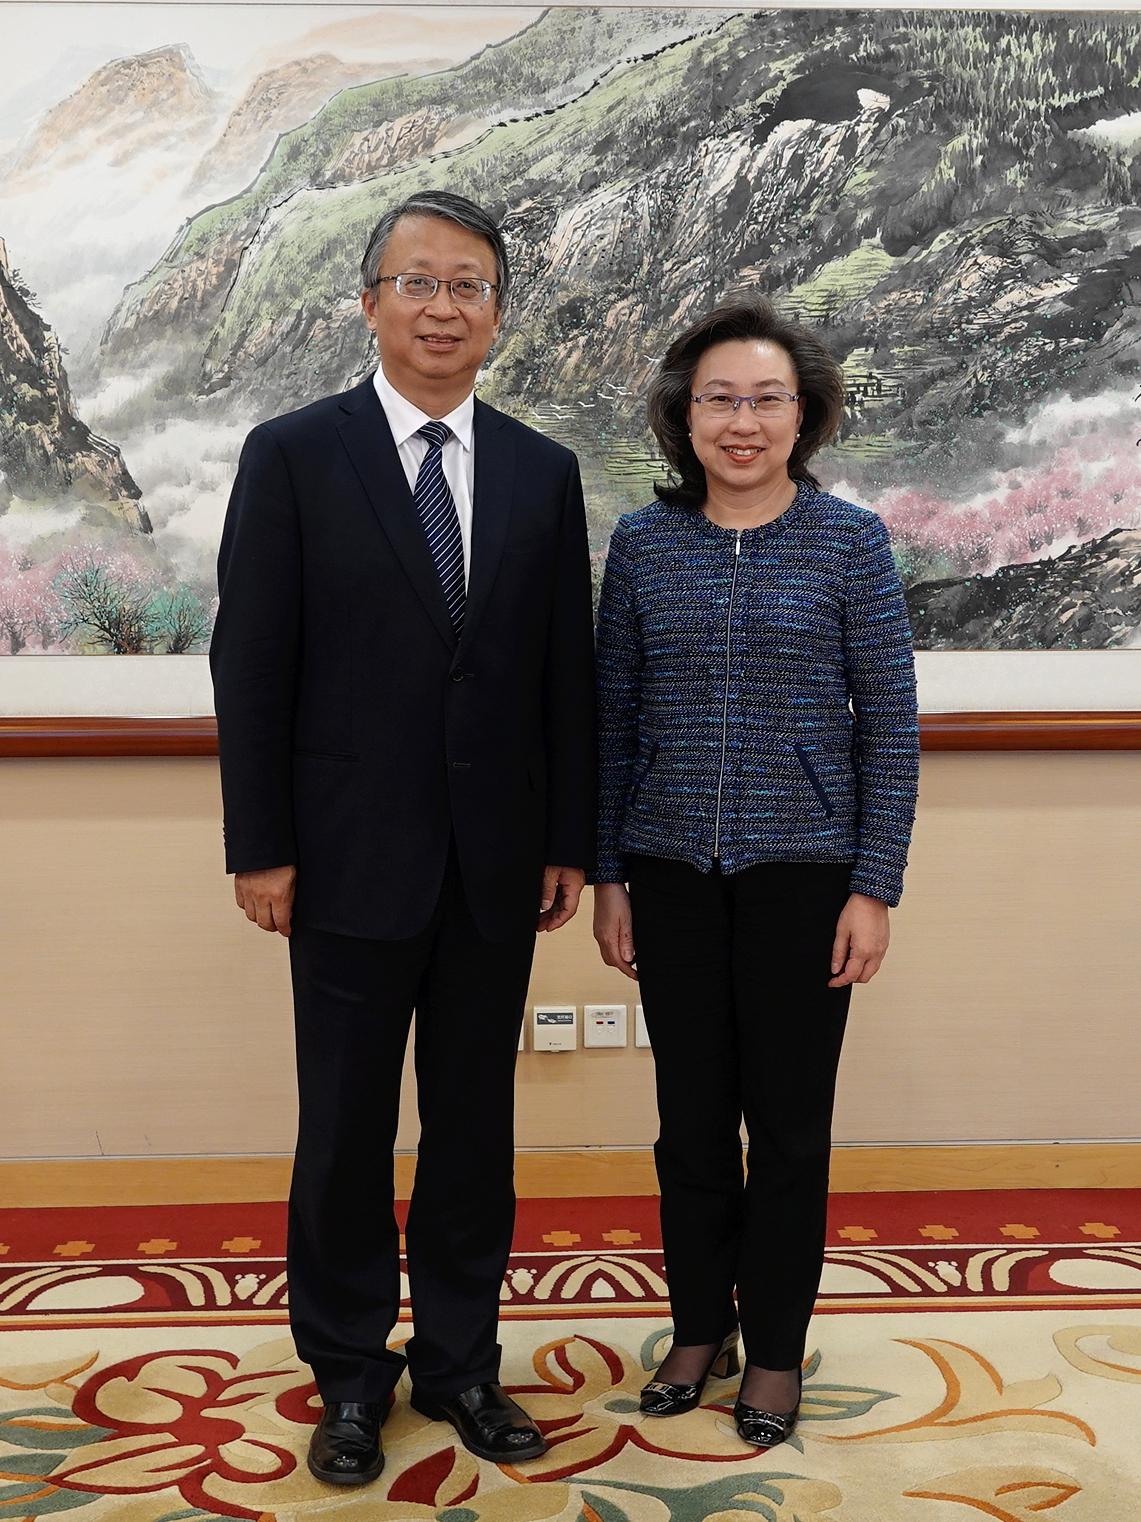 The Secretary for the Civil Service, Mrs Ingrid Yeung, continued her visit in Beijing today (April 27). Photo shows Mrs Yeung (right) meeting with the Chairman of the Legislative Affairs Commission and the Hong Kong Special Administrative Region Basic Law Committee under the Standing Committee of the National People's Congress, Mr Shen Chunyao (left) to exchange views on strengthening civil service training and future development directions.